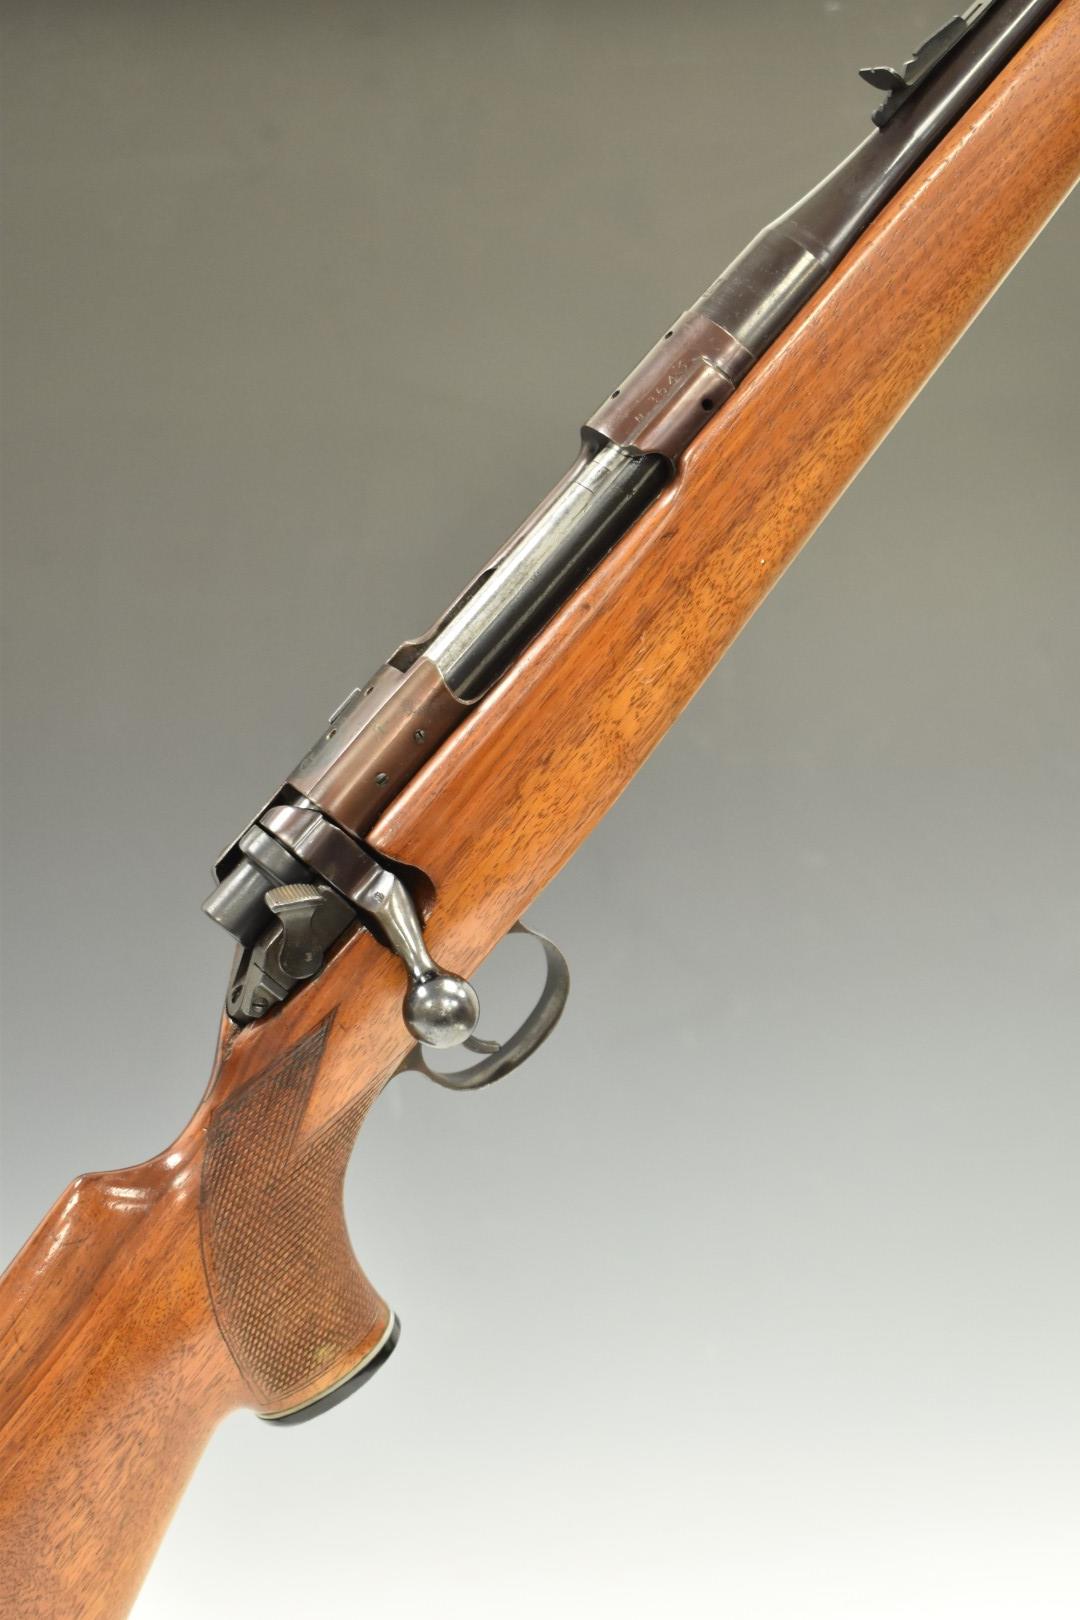 BSA .303 bolt-action rifle with chequered semi-pistol grip, adjustable sights, sling mounts and 24